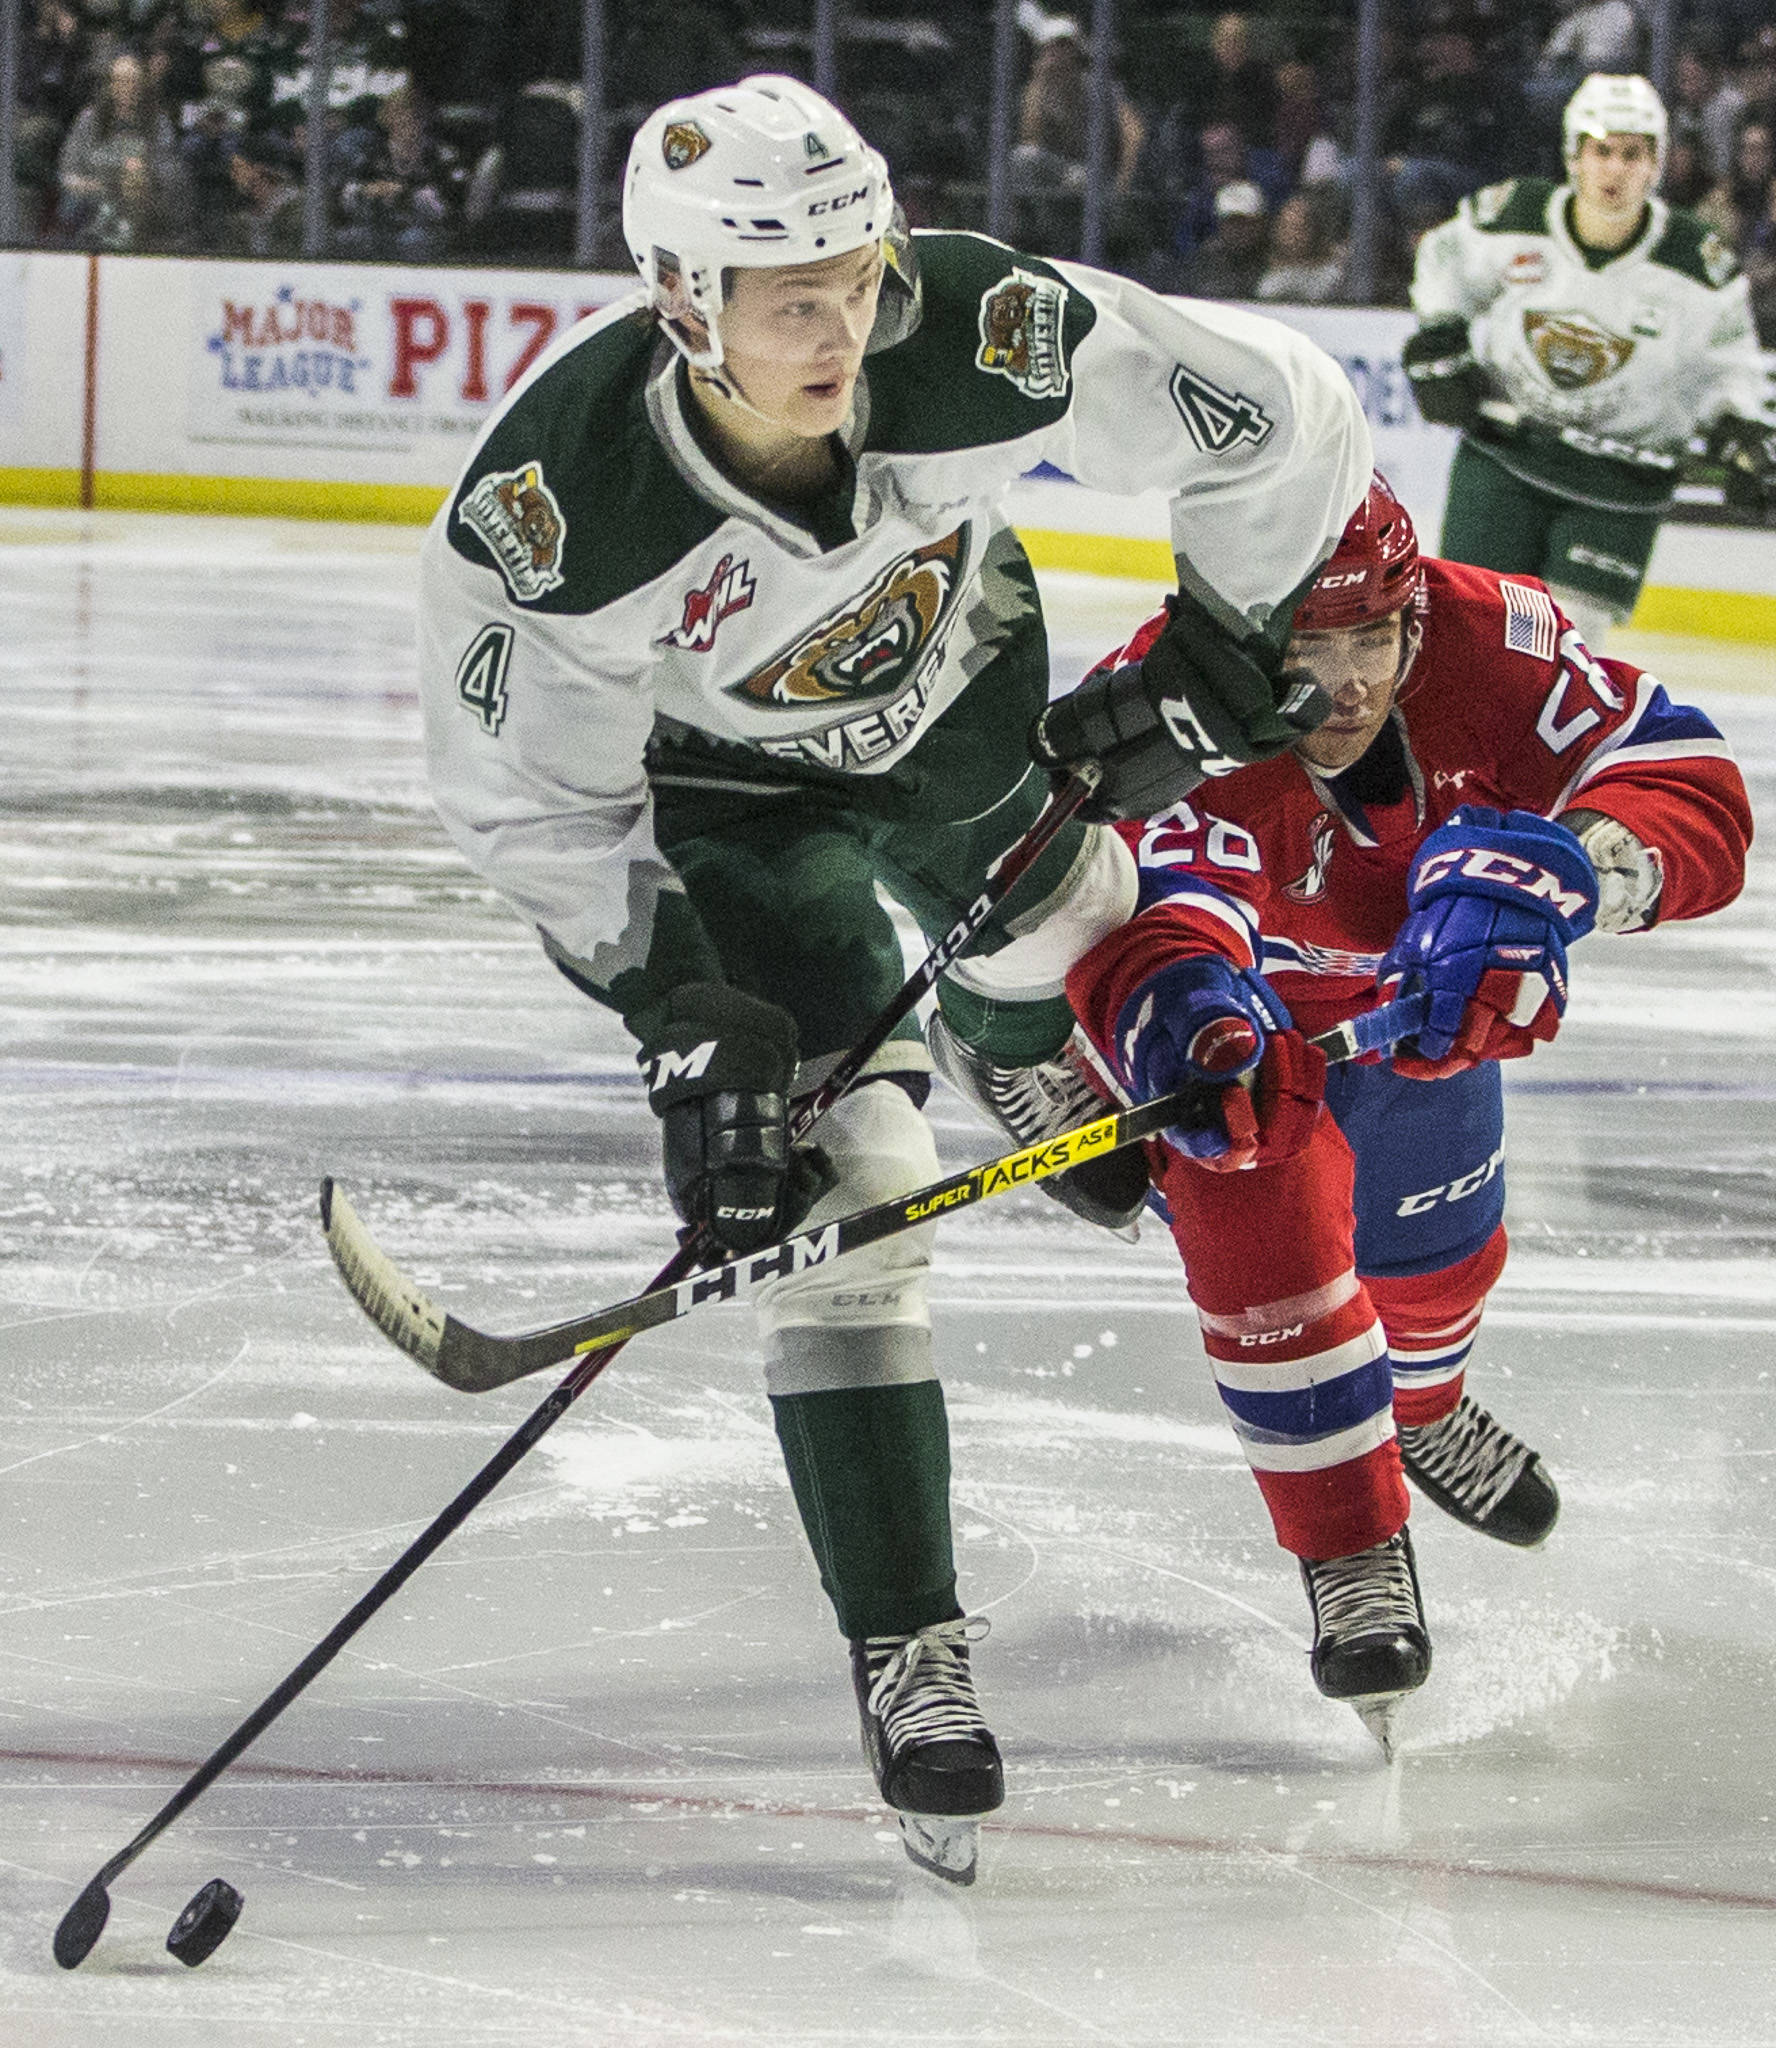 The Silvertips’ Kasper Puutio lines up for a shot during a game against the Chiefs on Jan. 26, 2020, at Angel of the Winds Arena in Everett. (Olivia Vanni / The Herald)